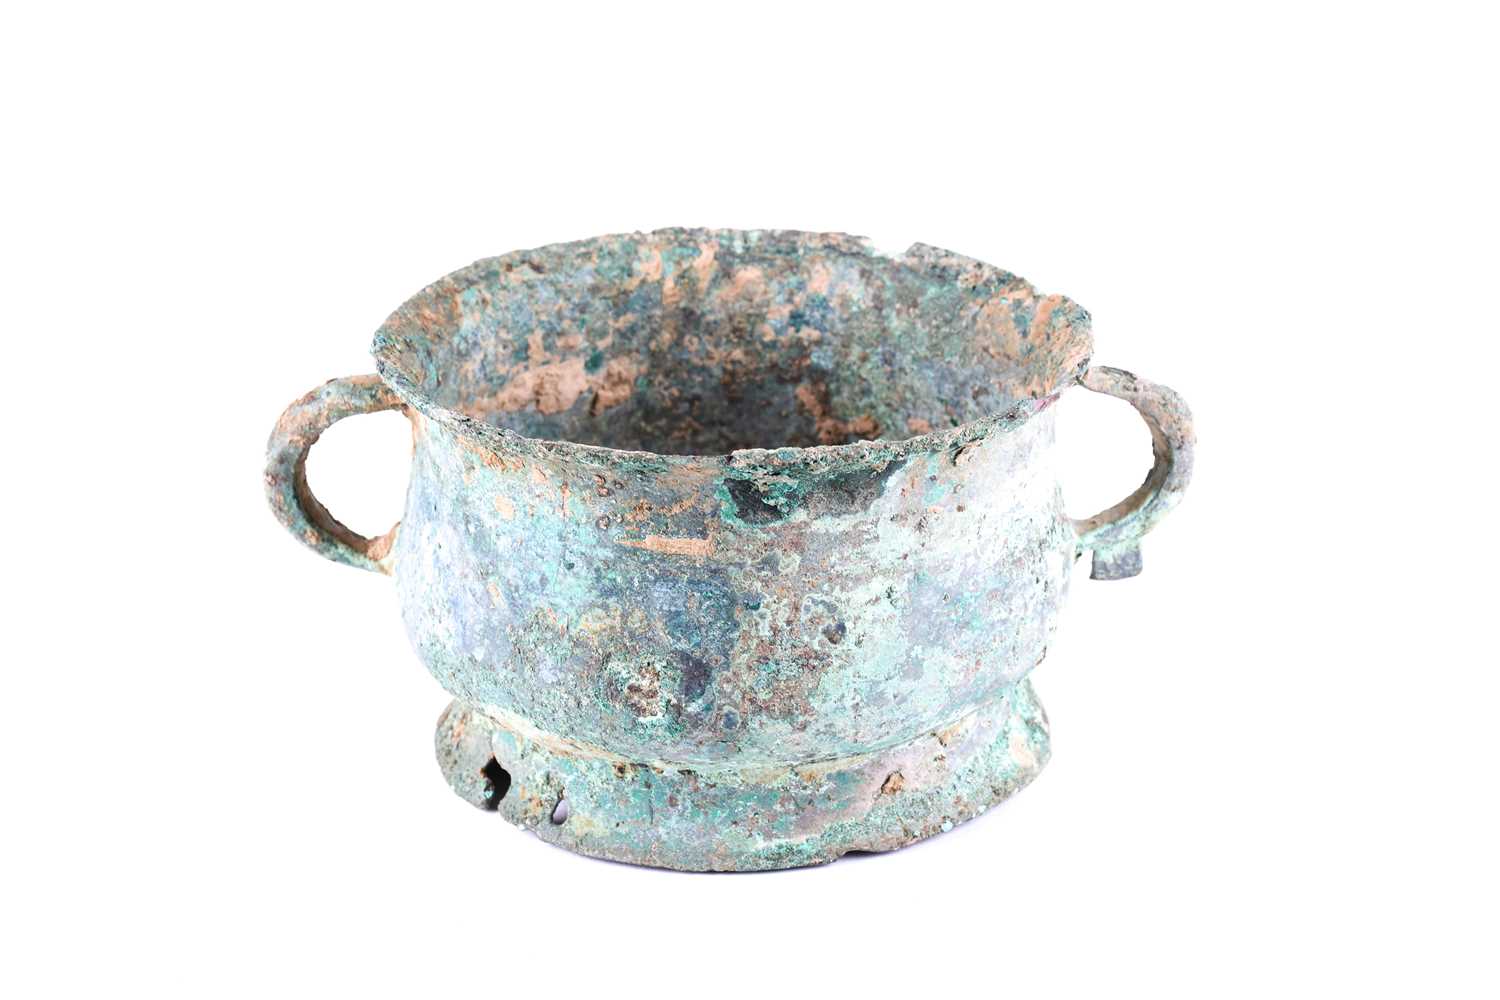 A Chinese Bronze Gui, late Western Zhou (1050BC- 770BC), 中国， 青铜簋一件，西周晚期（1050BC- 770BC） with